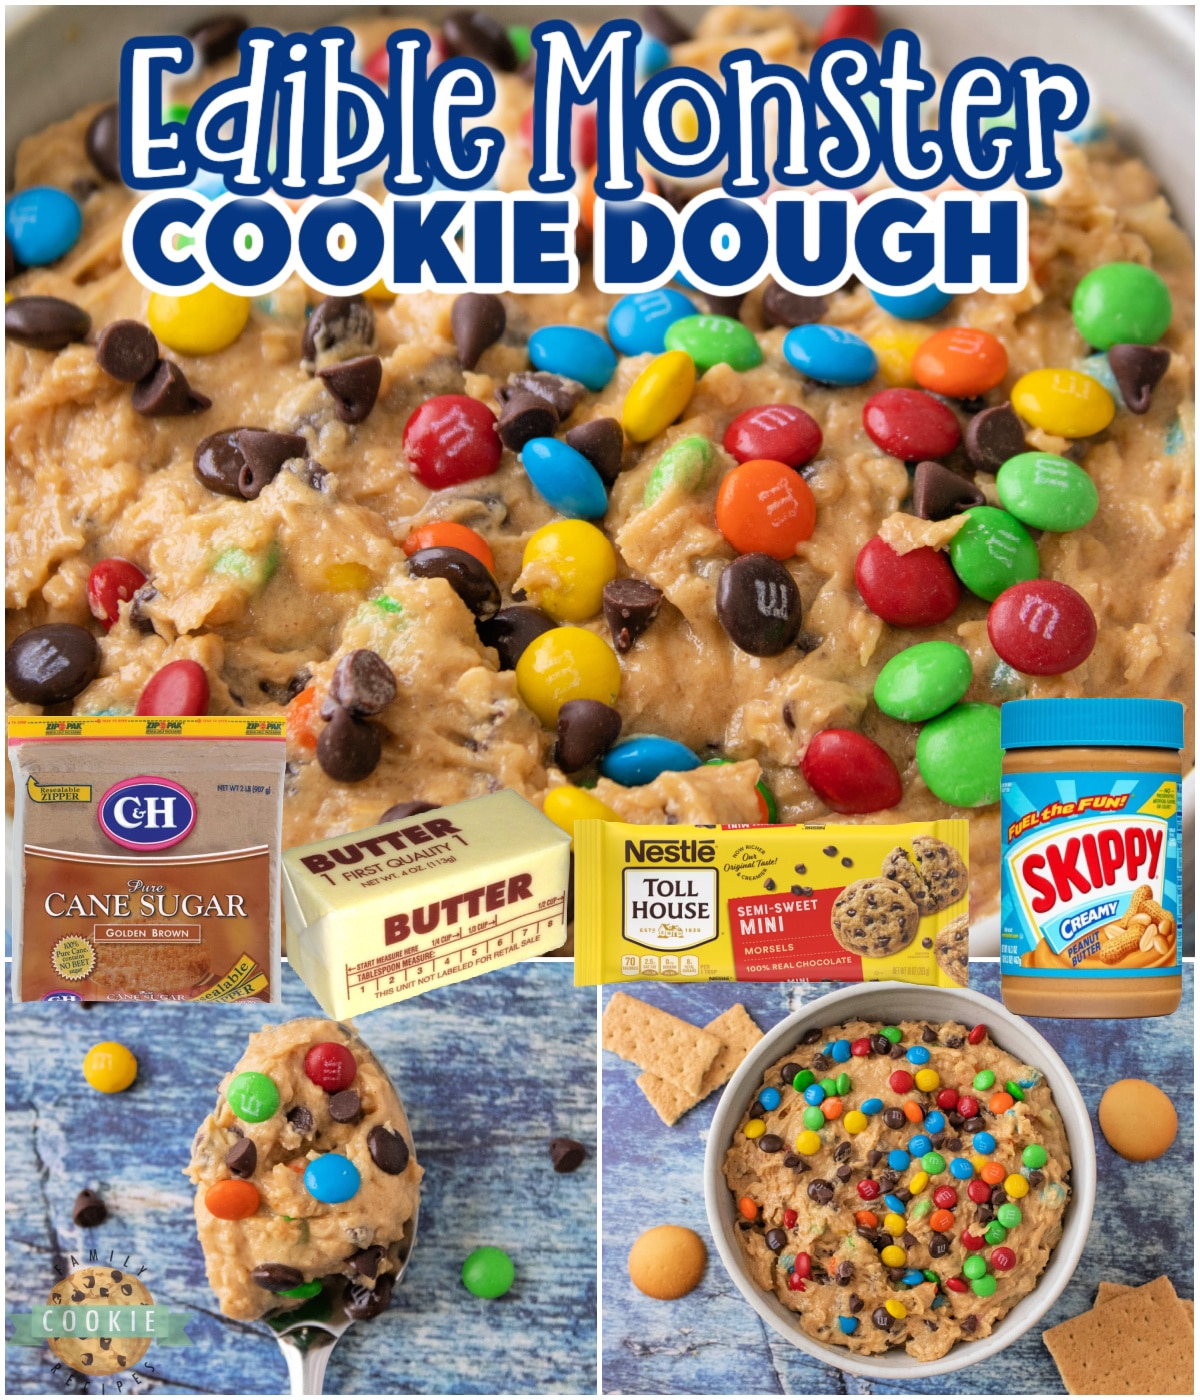 Edible Monster Cookie Dough made with heat-treated flour, no eggs and all of the peanut butter cookie dough flavor that you love. Monster cookie dough that is completely safe to eat!